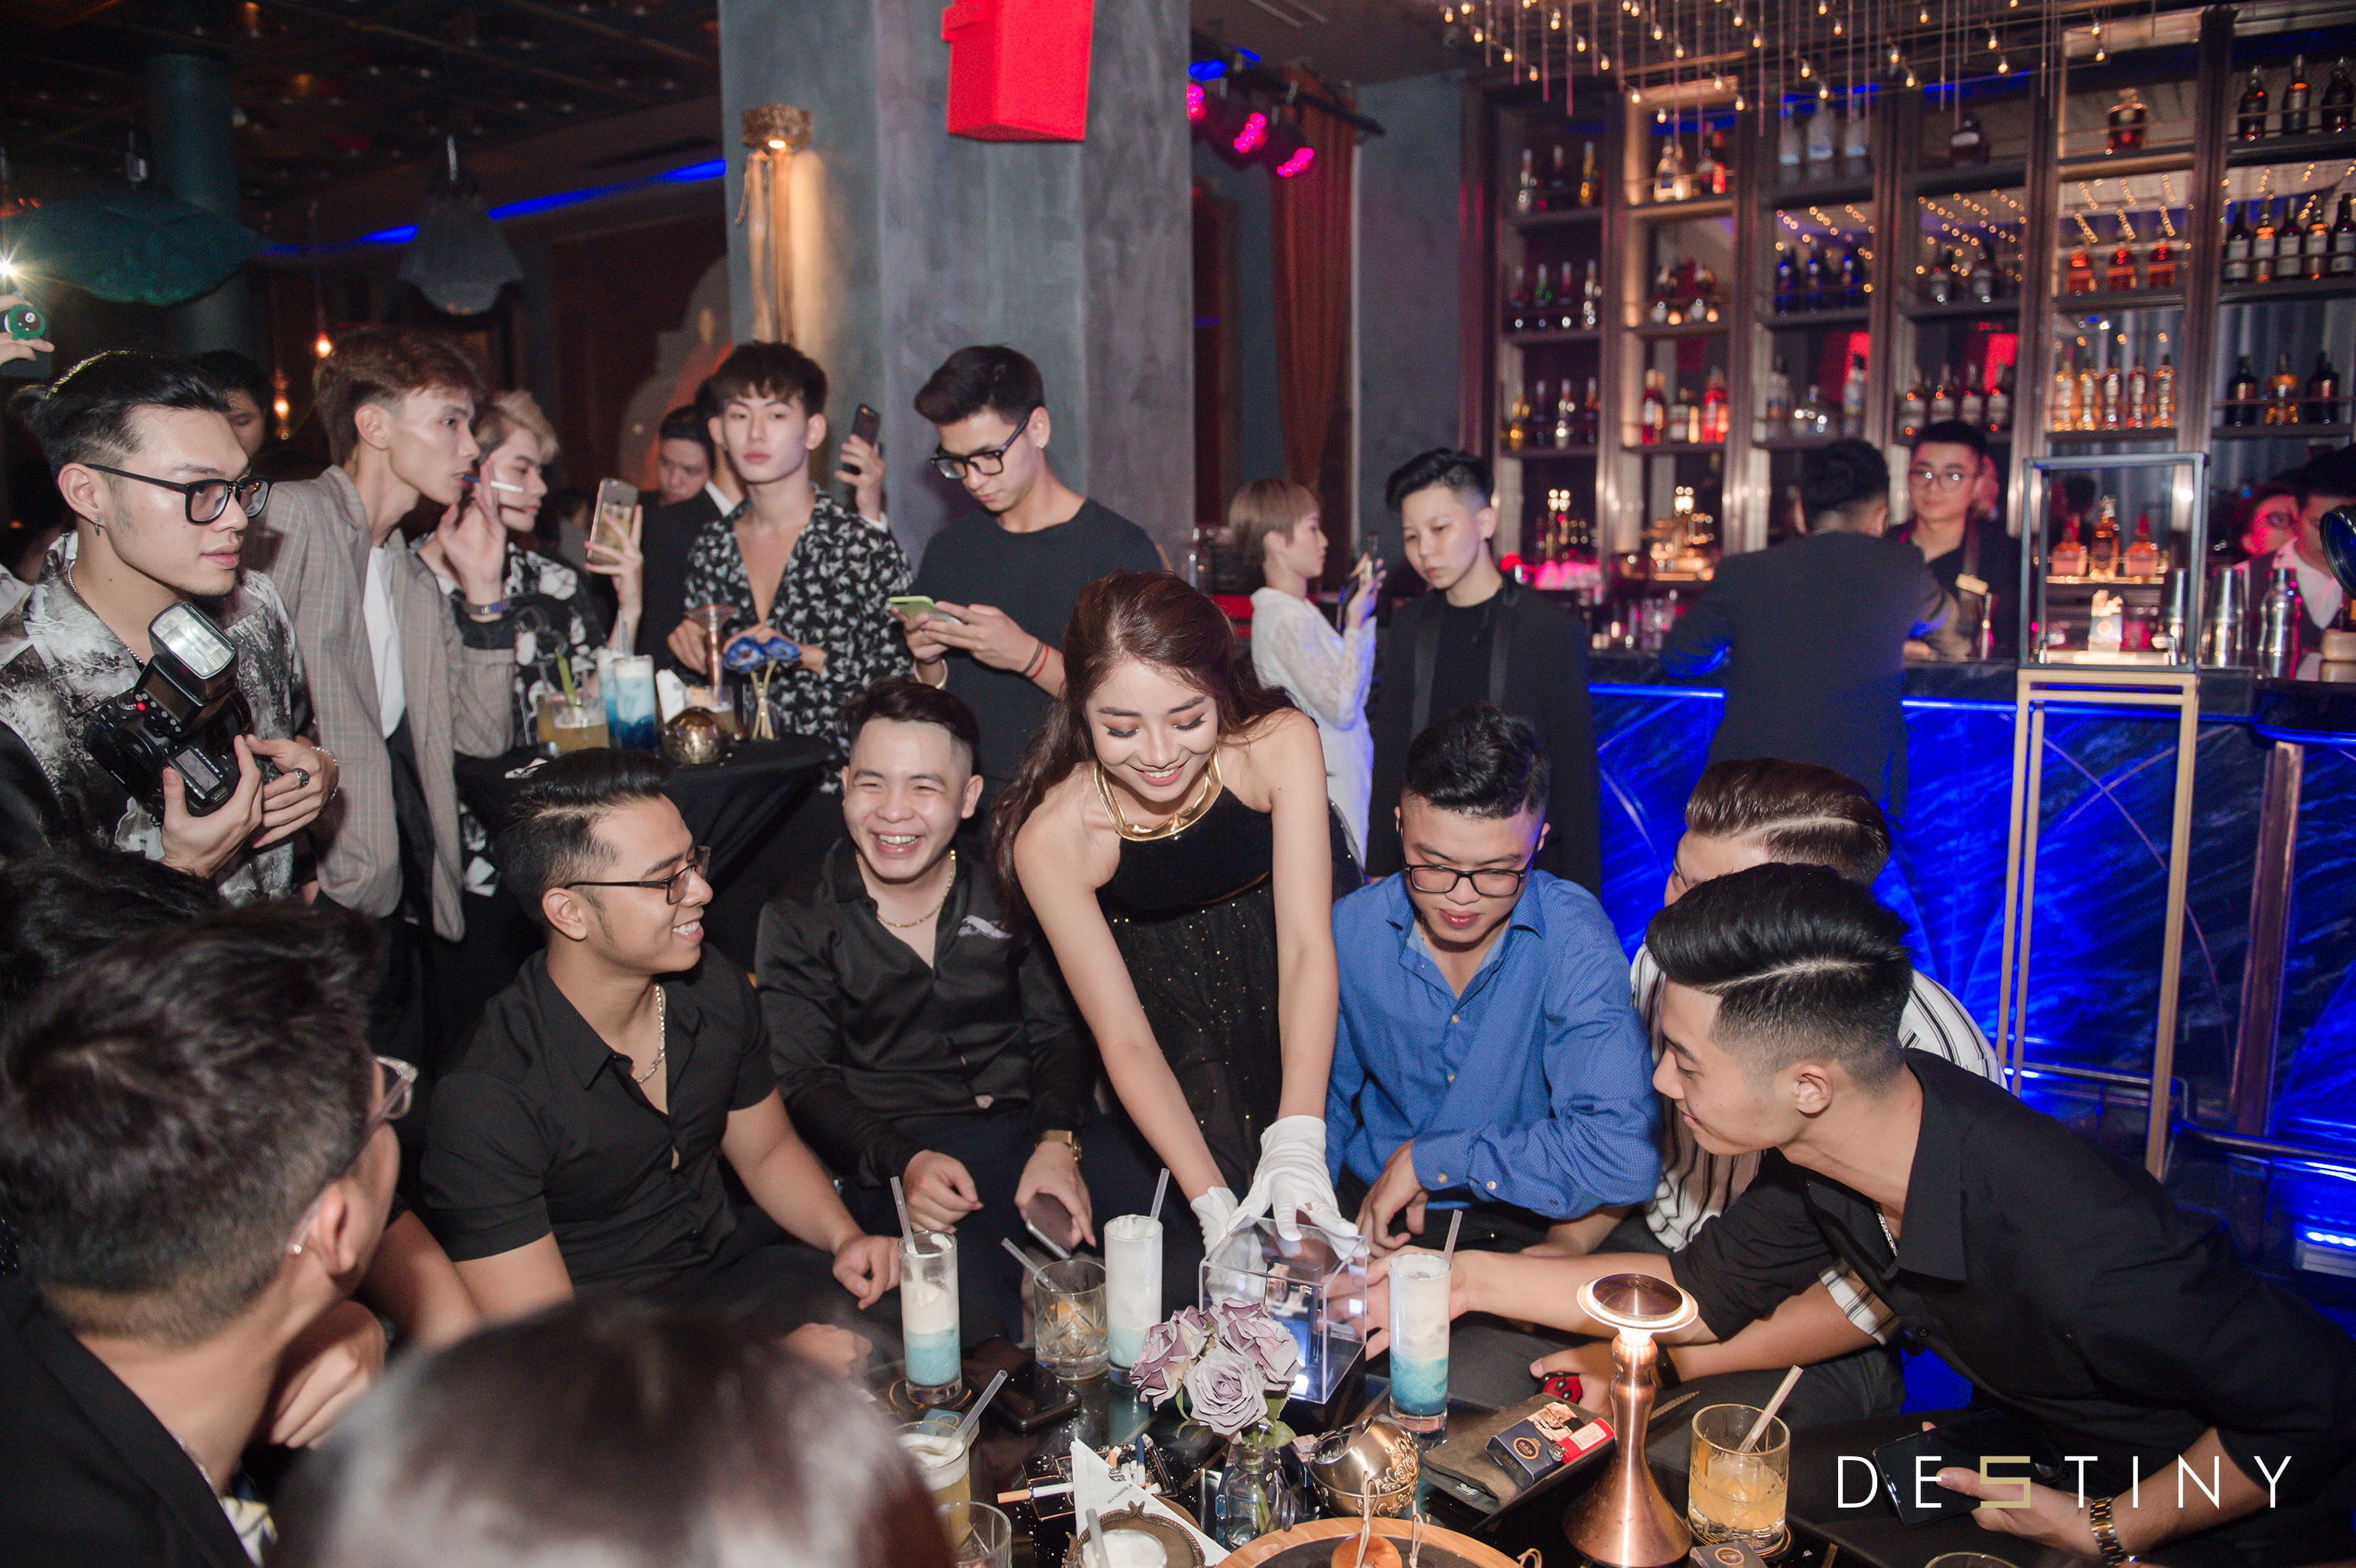 DE5TINY guests discuss style and self-image at the exclusive party